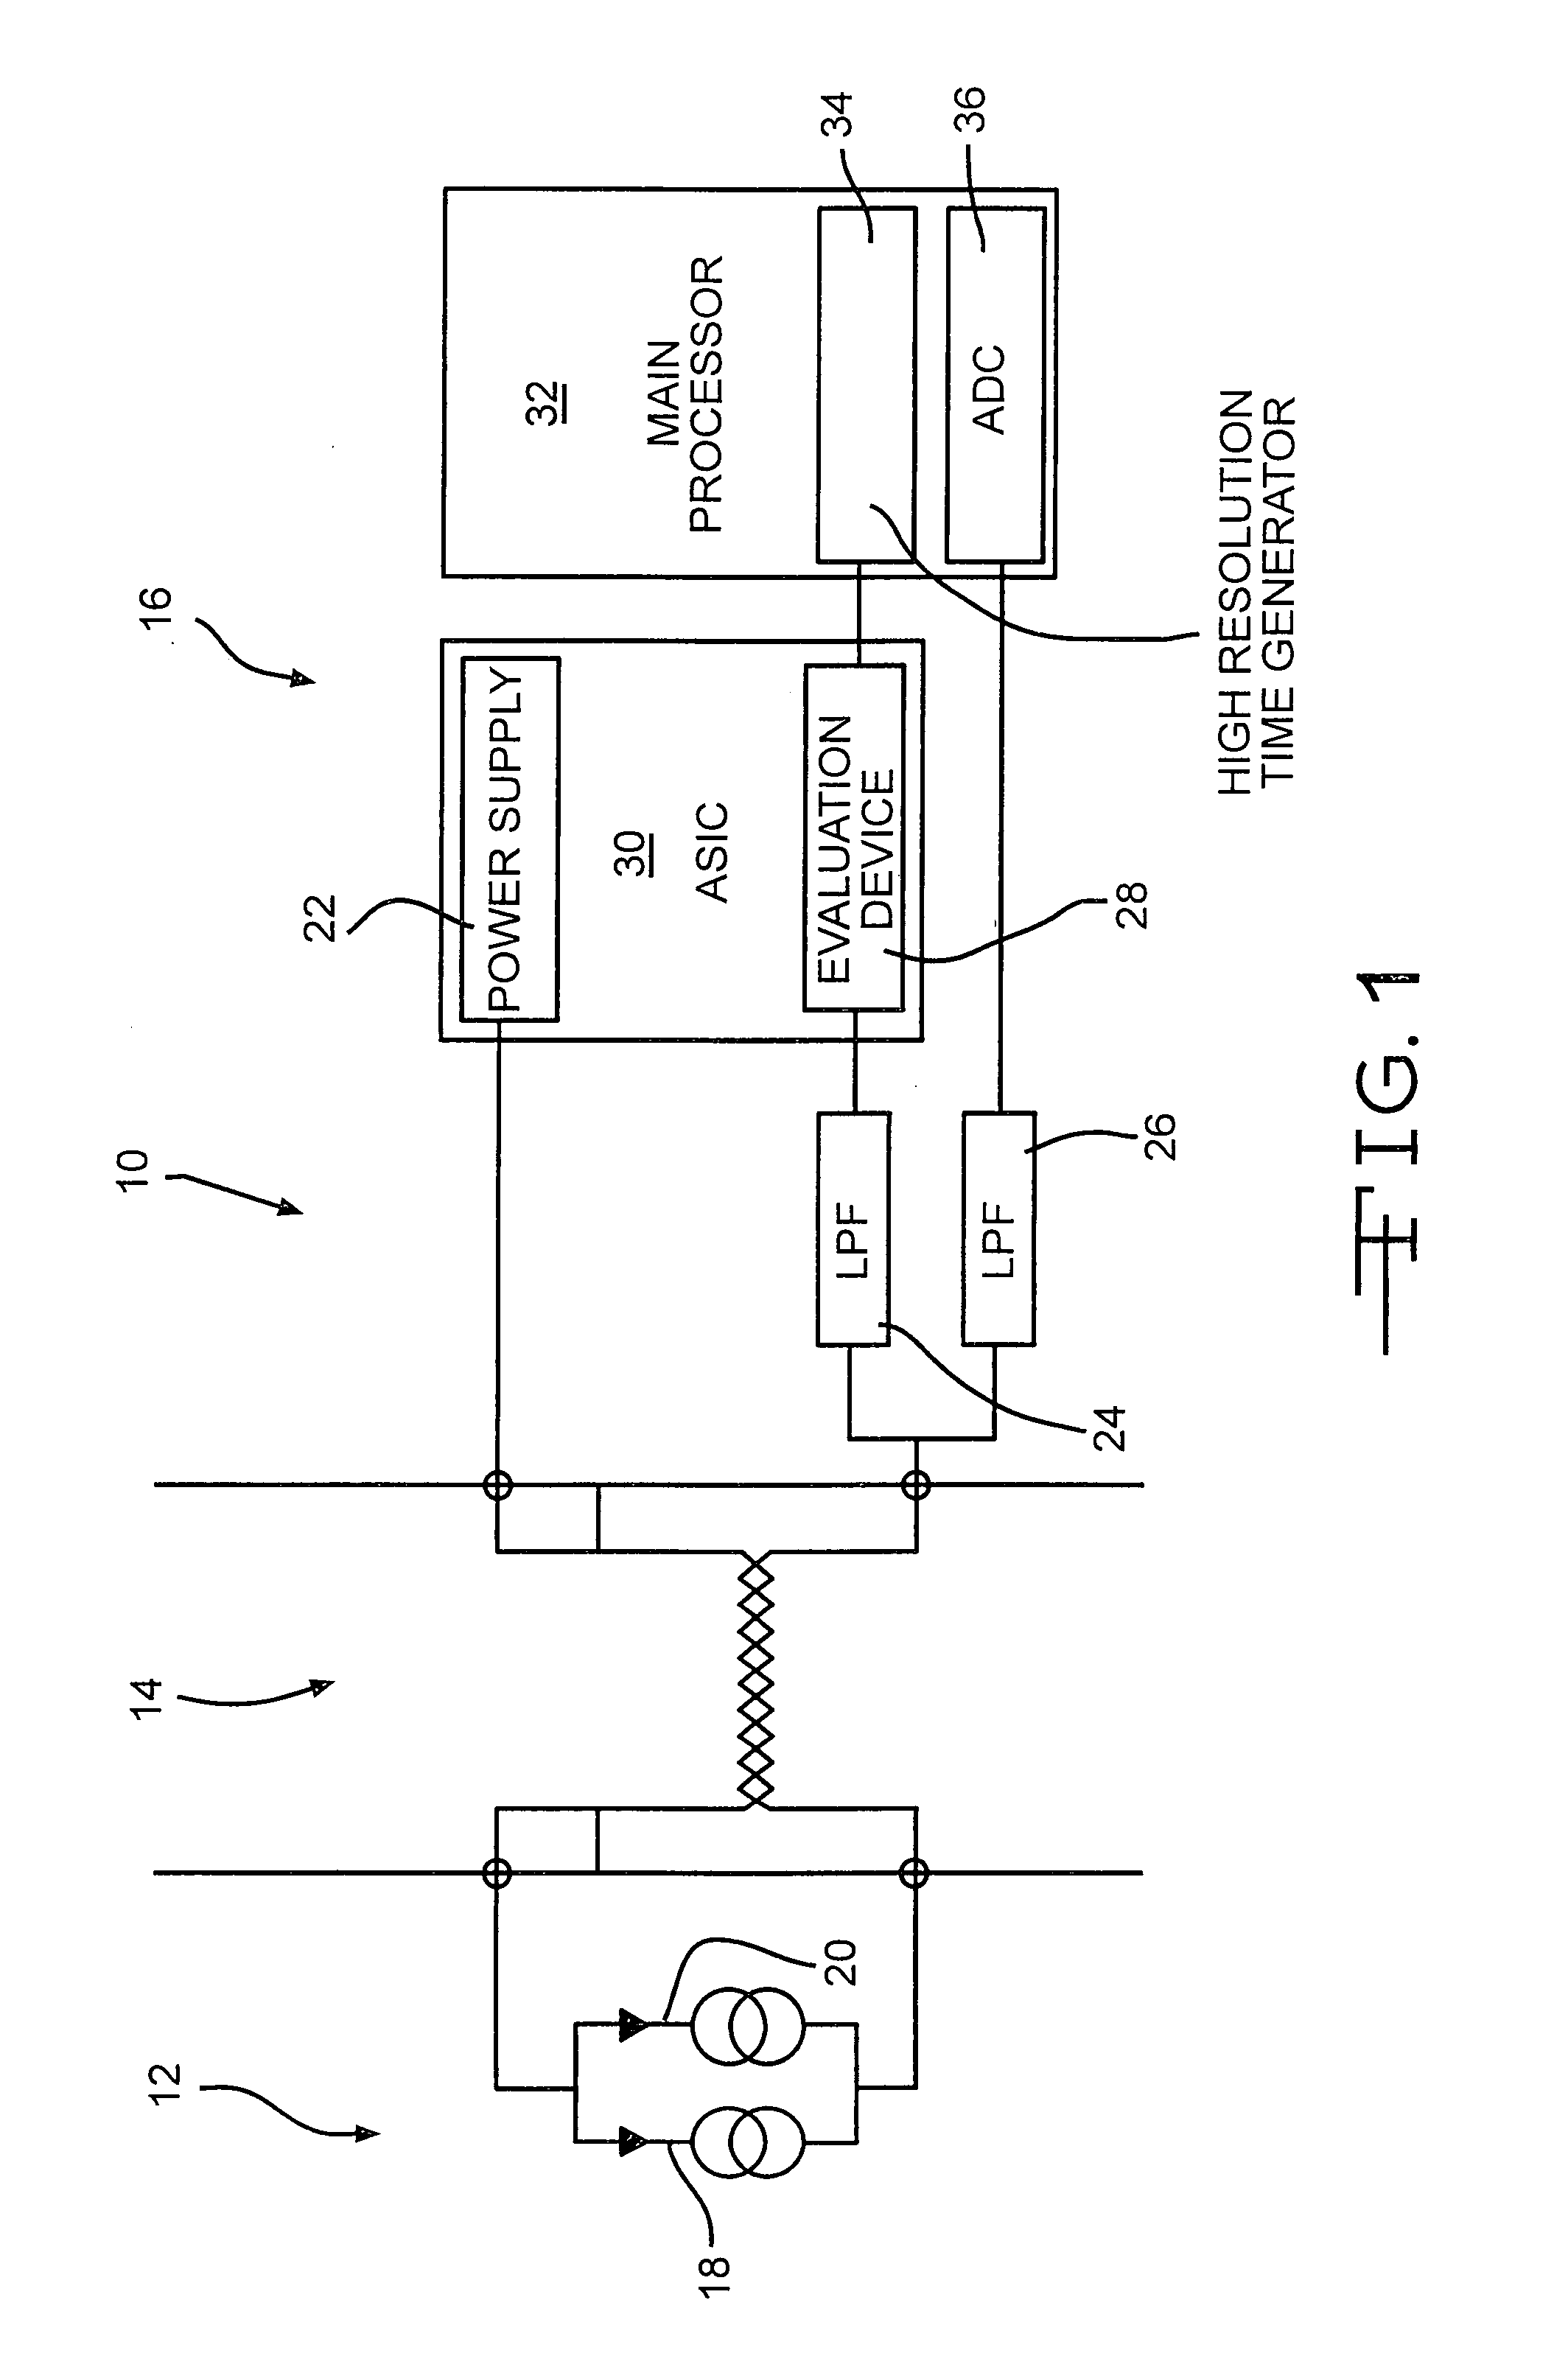 Method and device for detecting a rotational speed, especially the rotational speed of the wheel of a vehicle